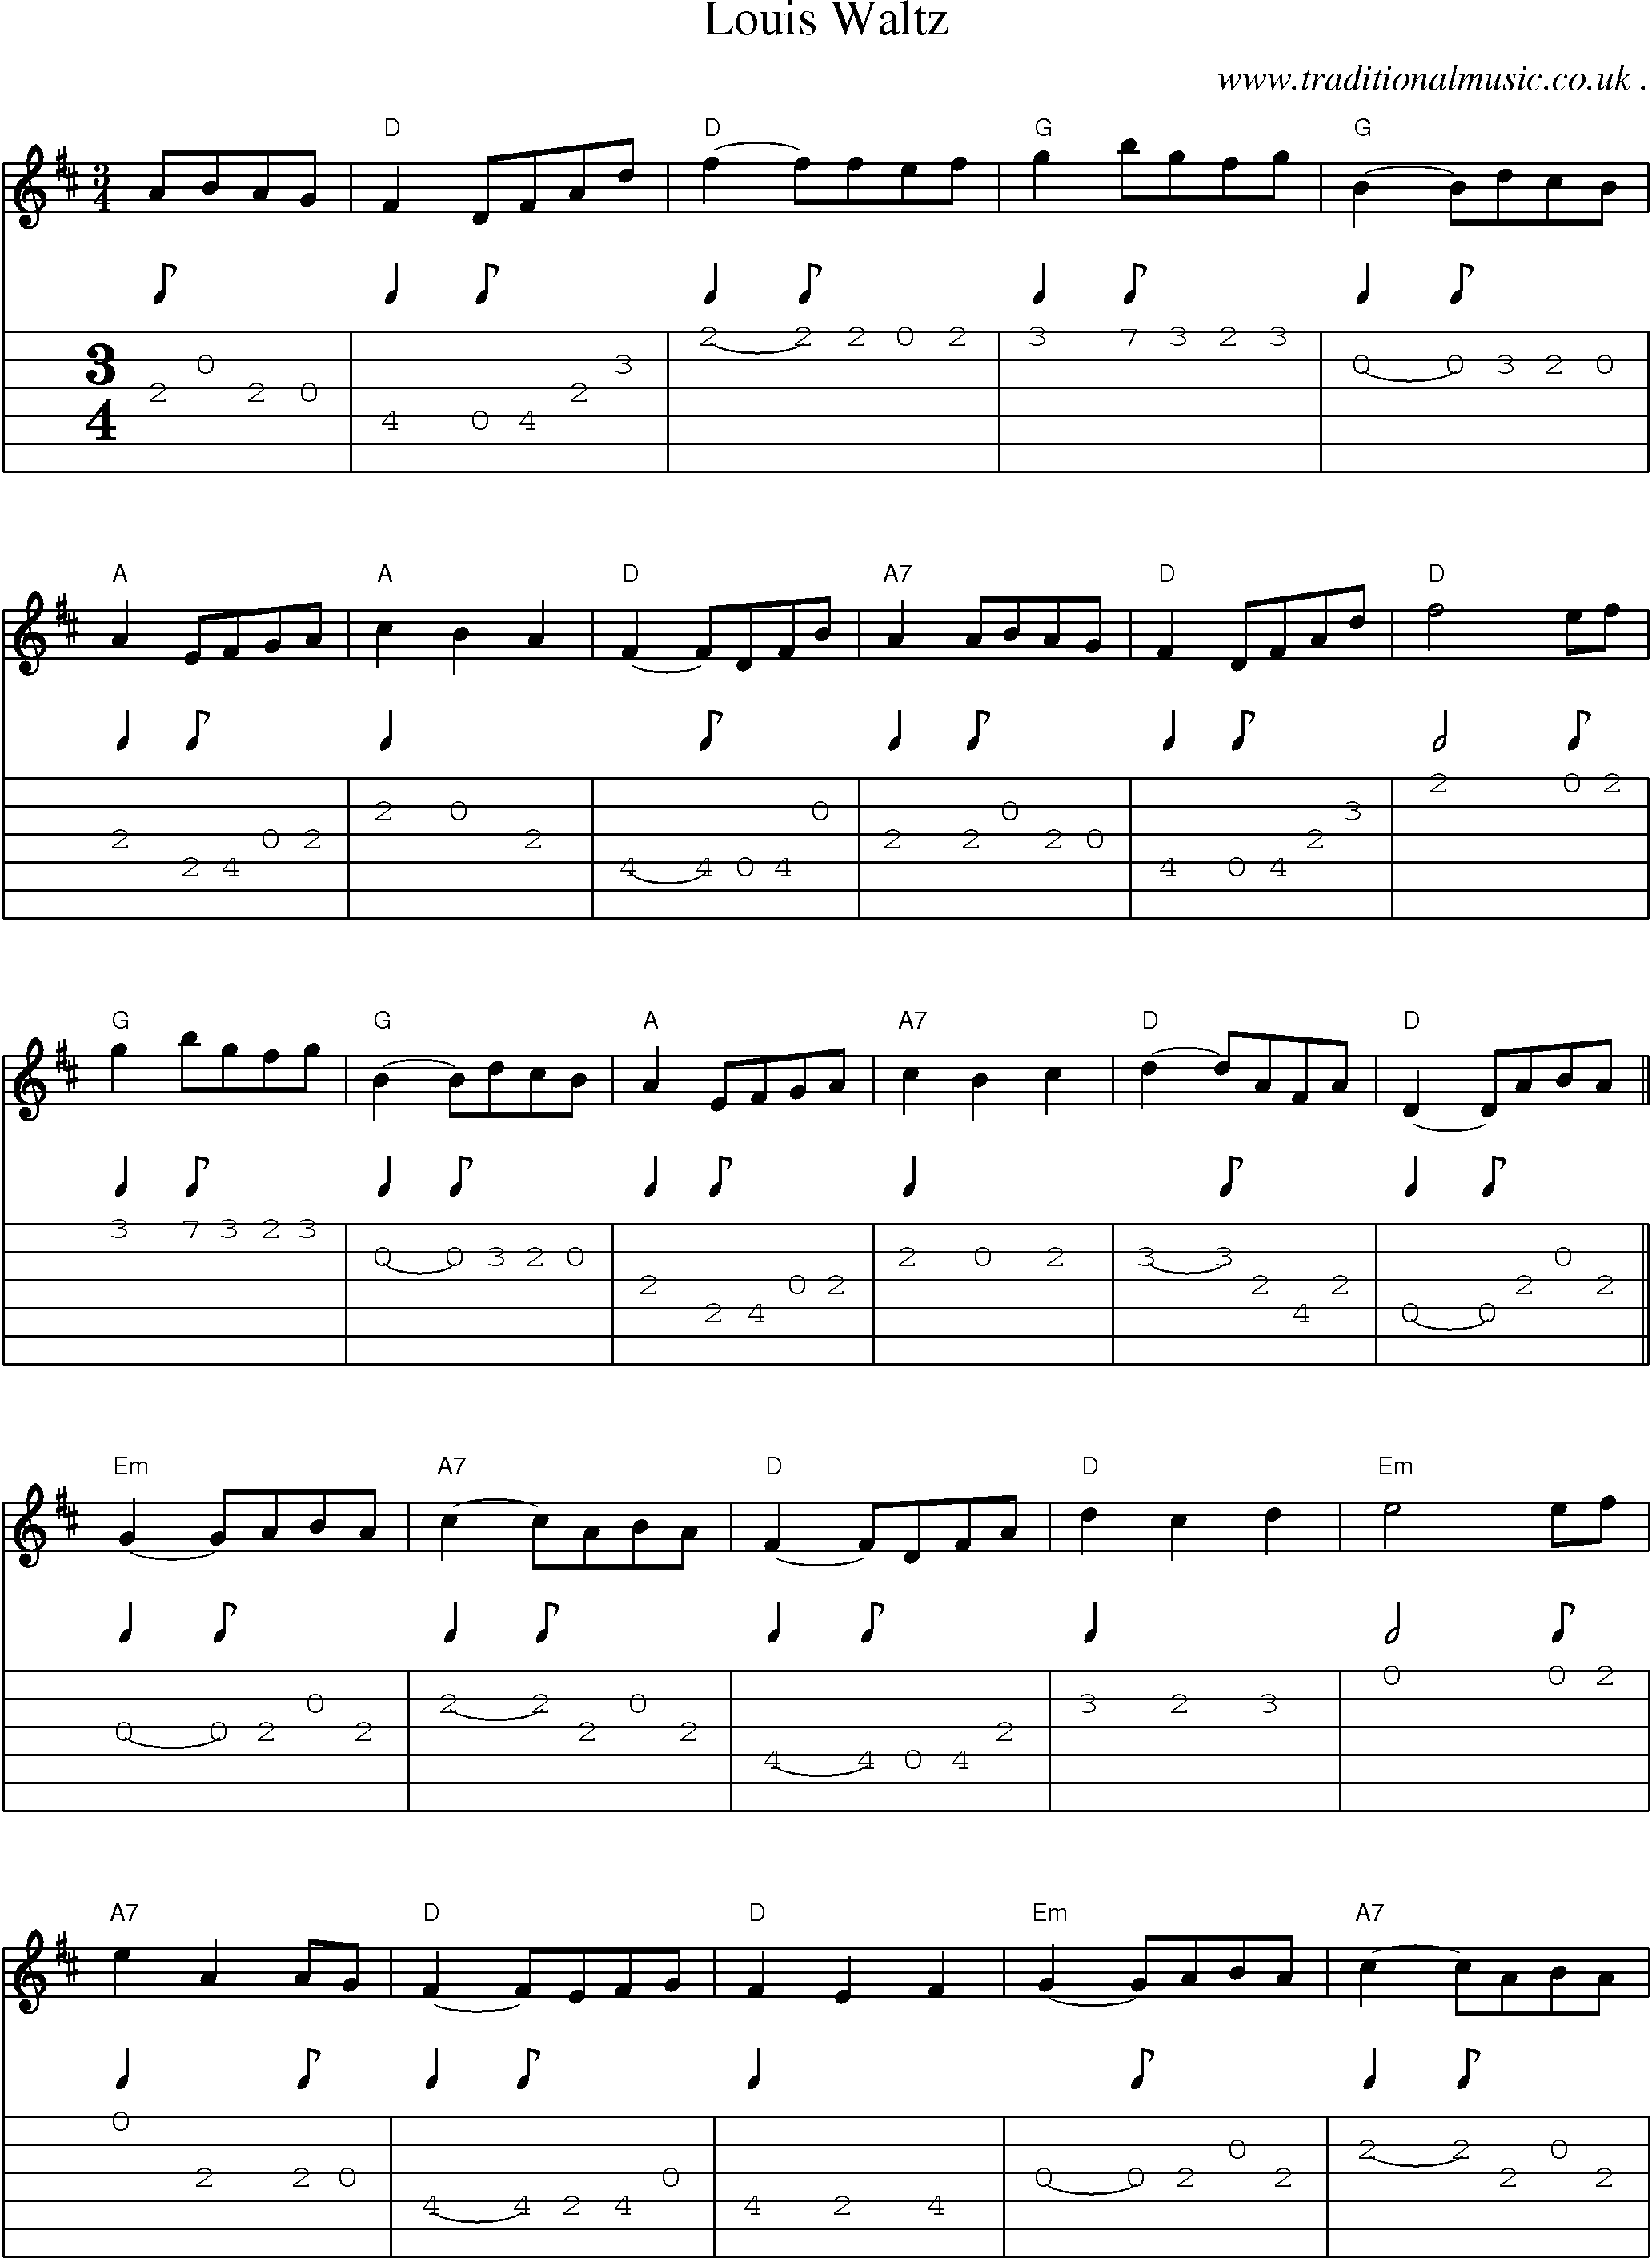 Sheet-Music and Guitar Tabs for Louis Waltz